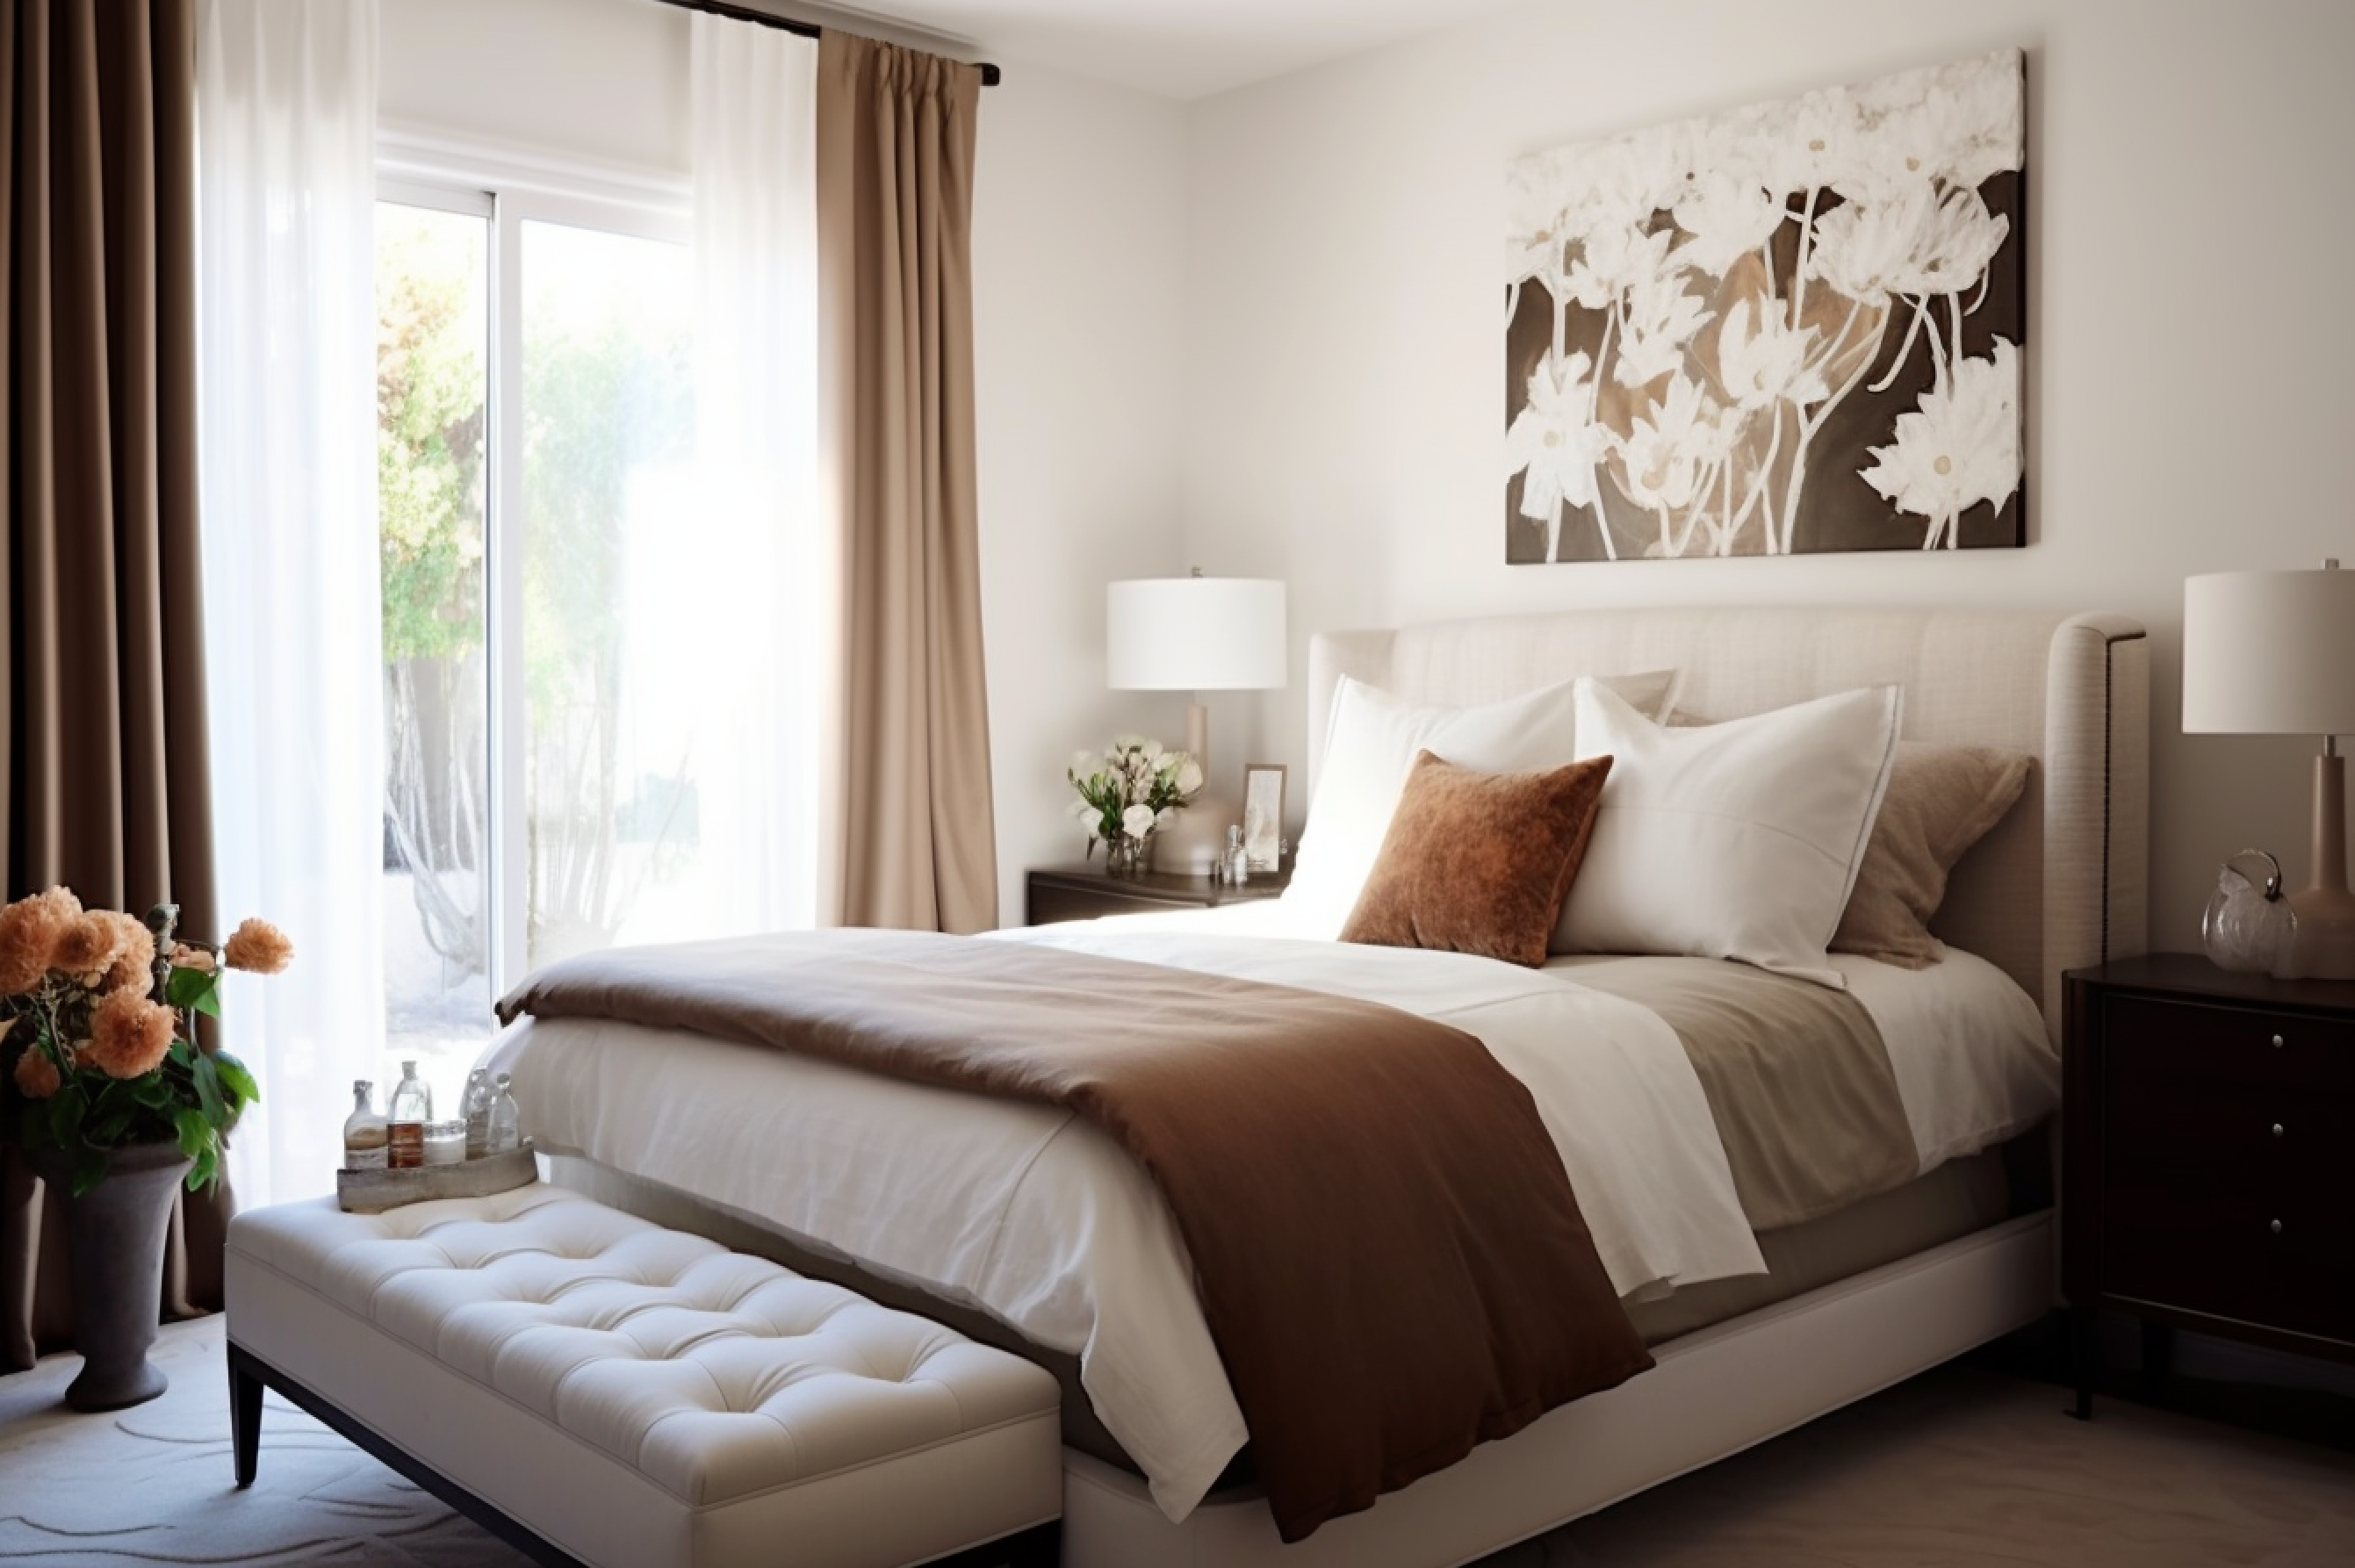 Photo of a master bedroom with a coffee brown upholstered bed, cream white walls, and matching bed linens.